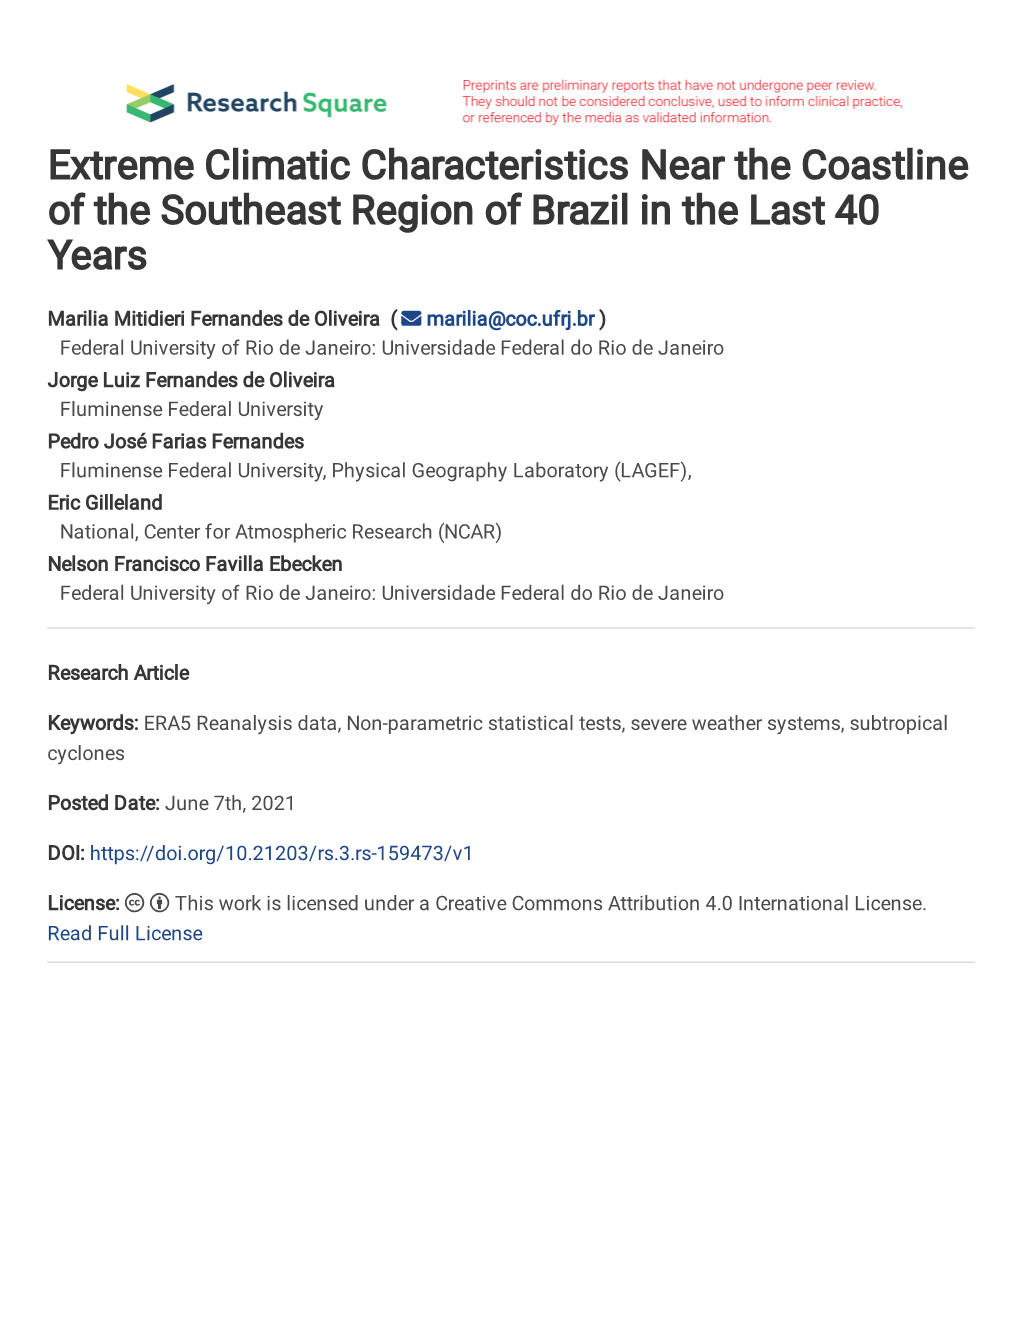 Extreme Climatic Characteristics Near the Coastline of the Southeast Region of Brazil in the Last 40 Years